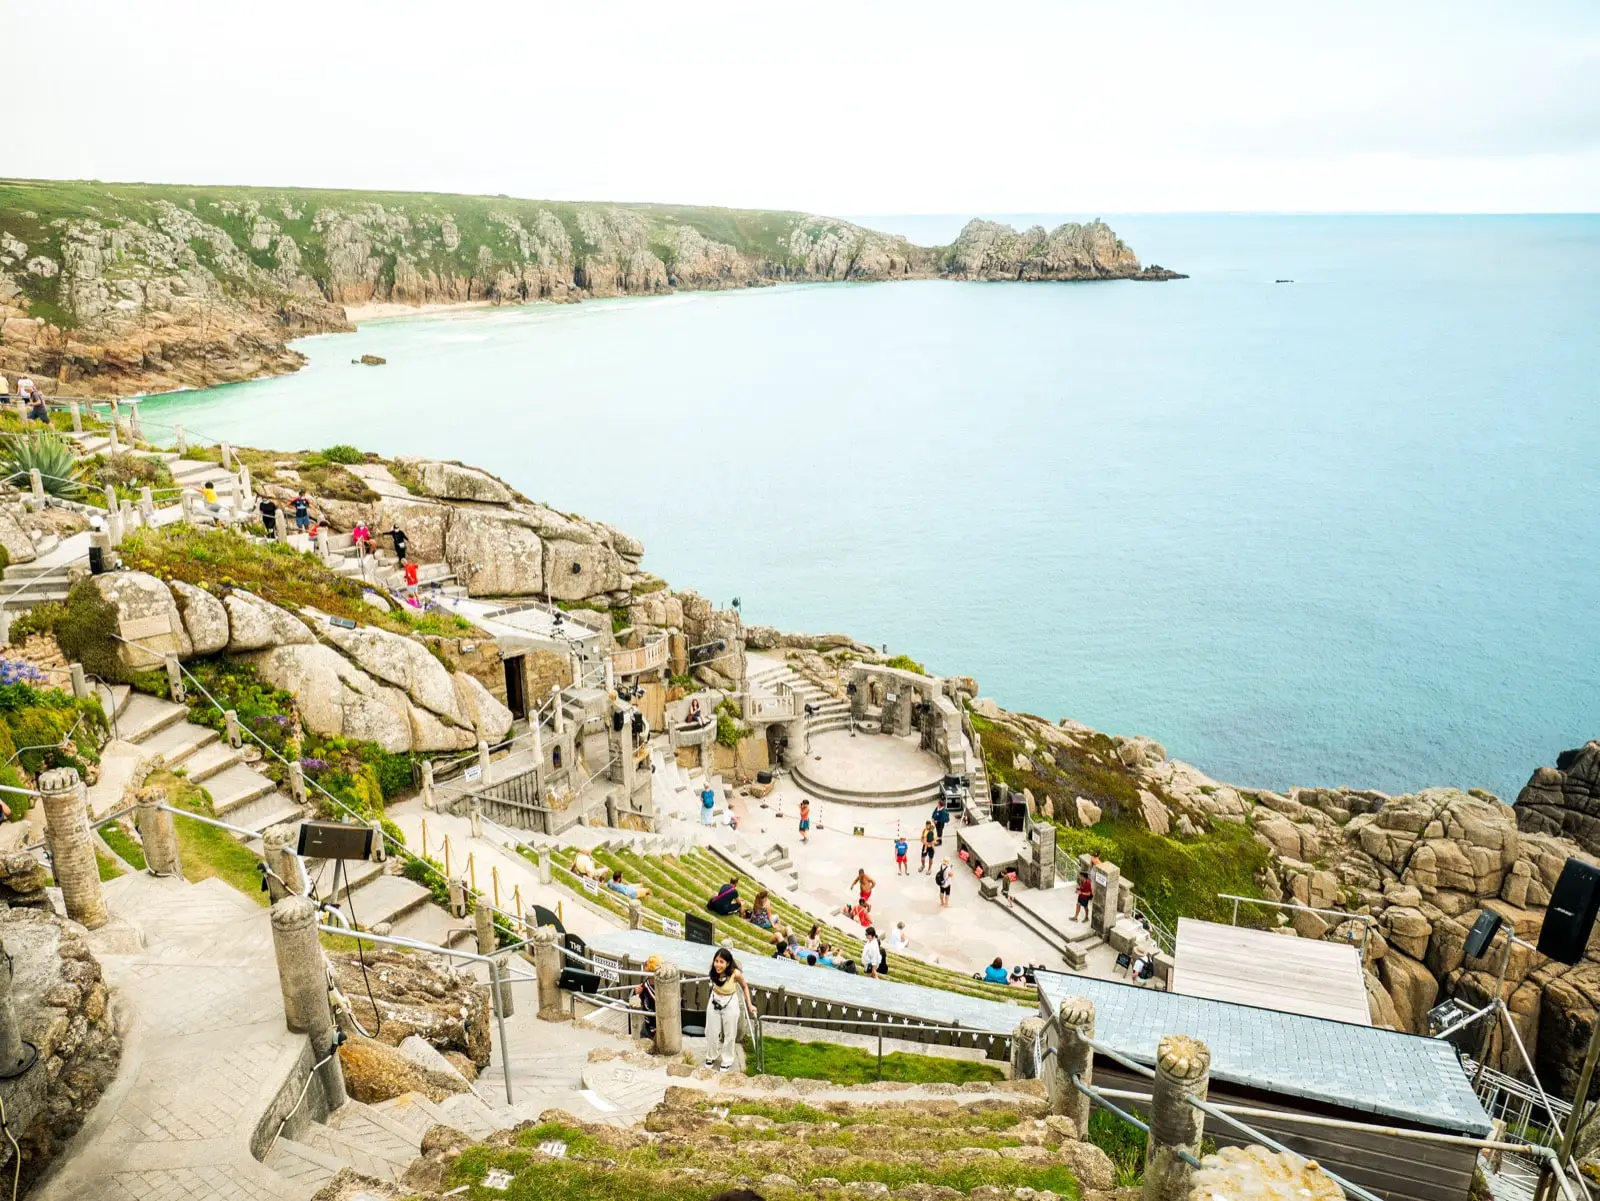 Things to do in Penzance The Minack Theatre